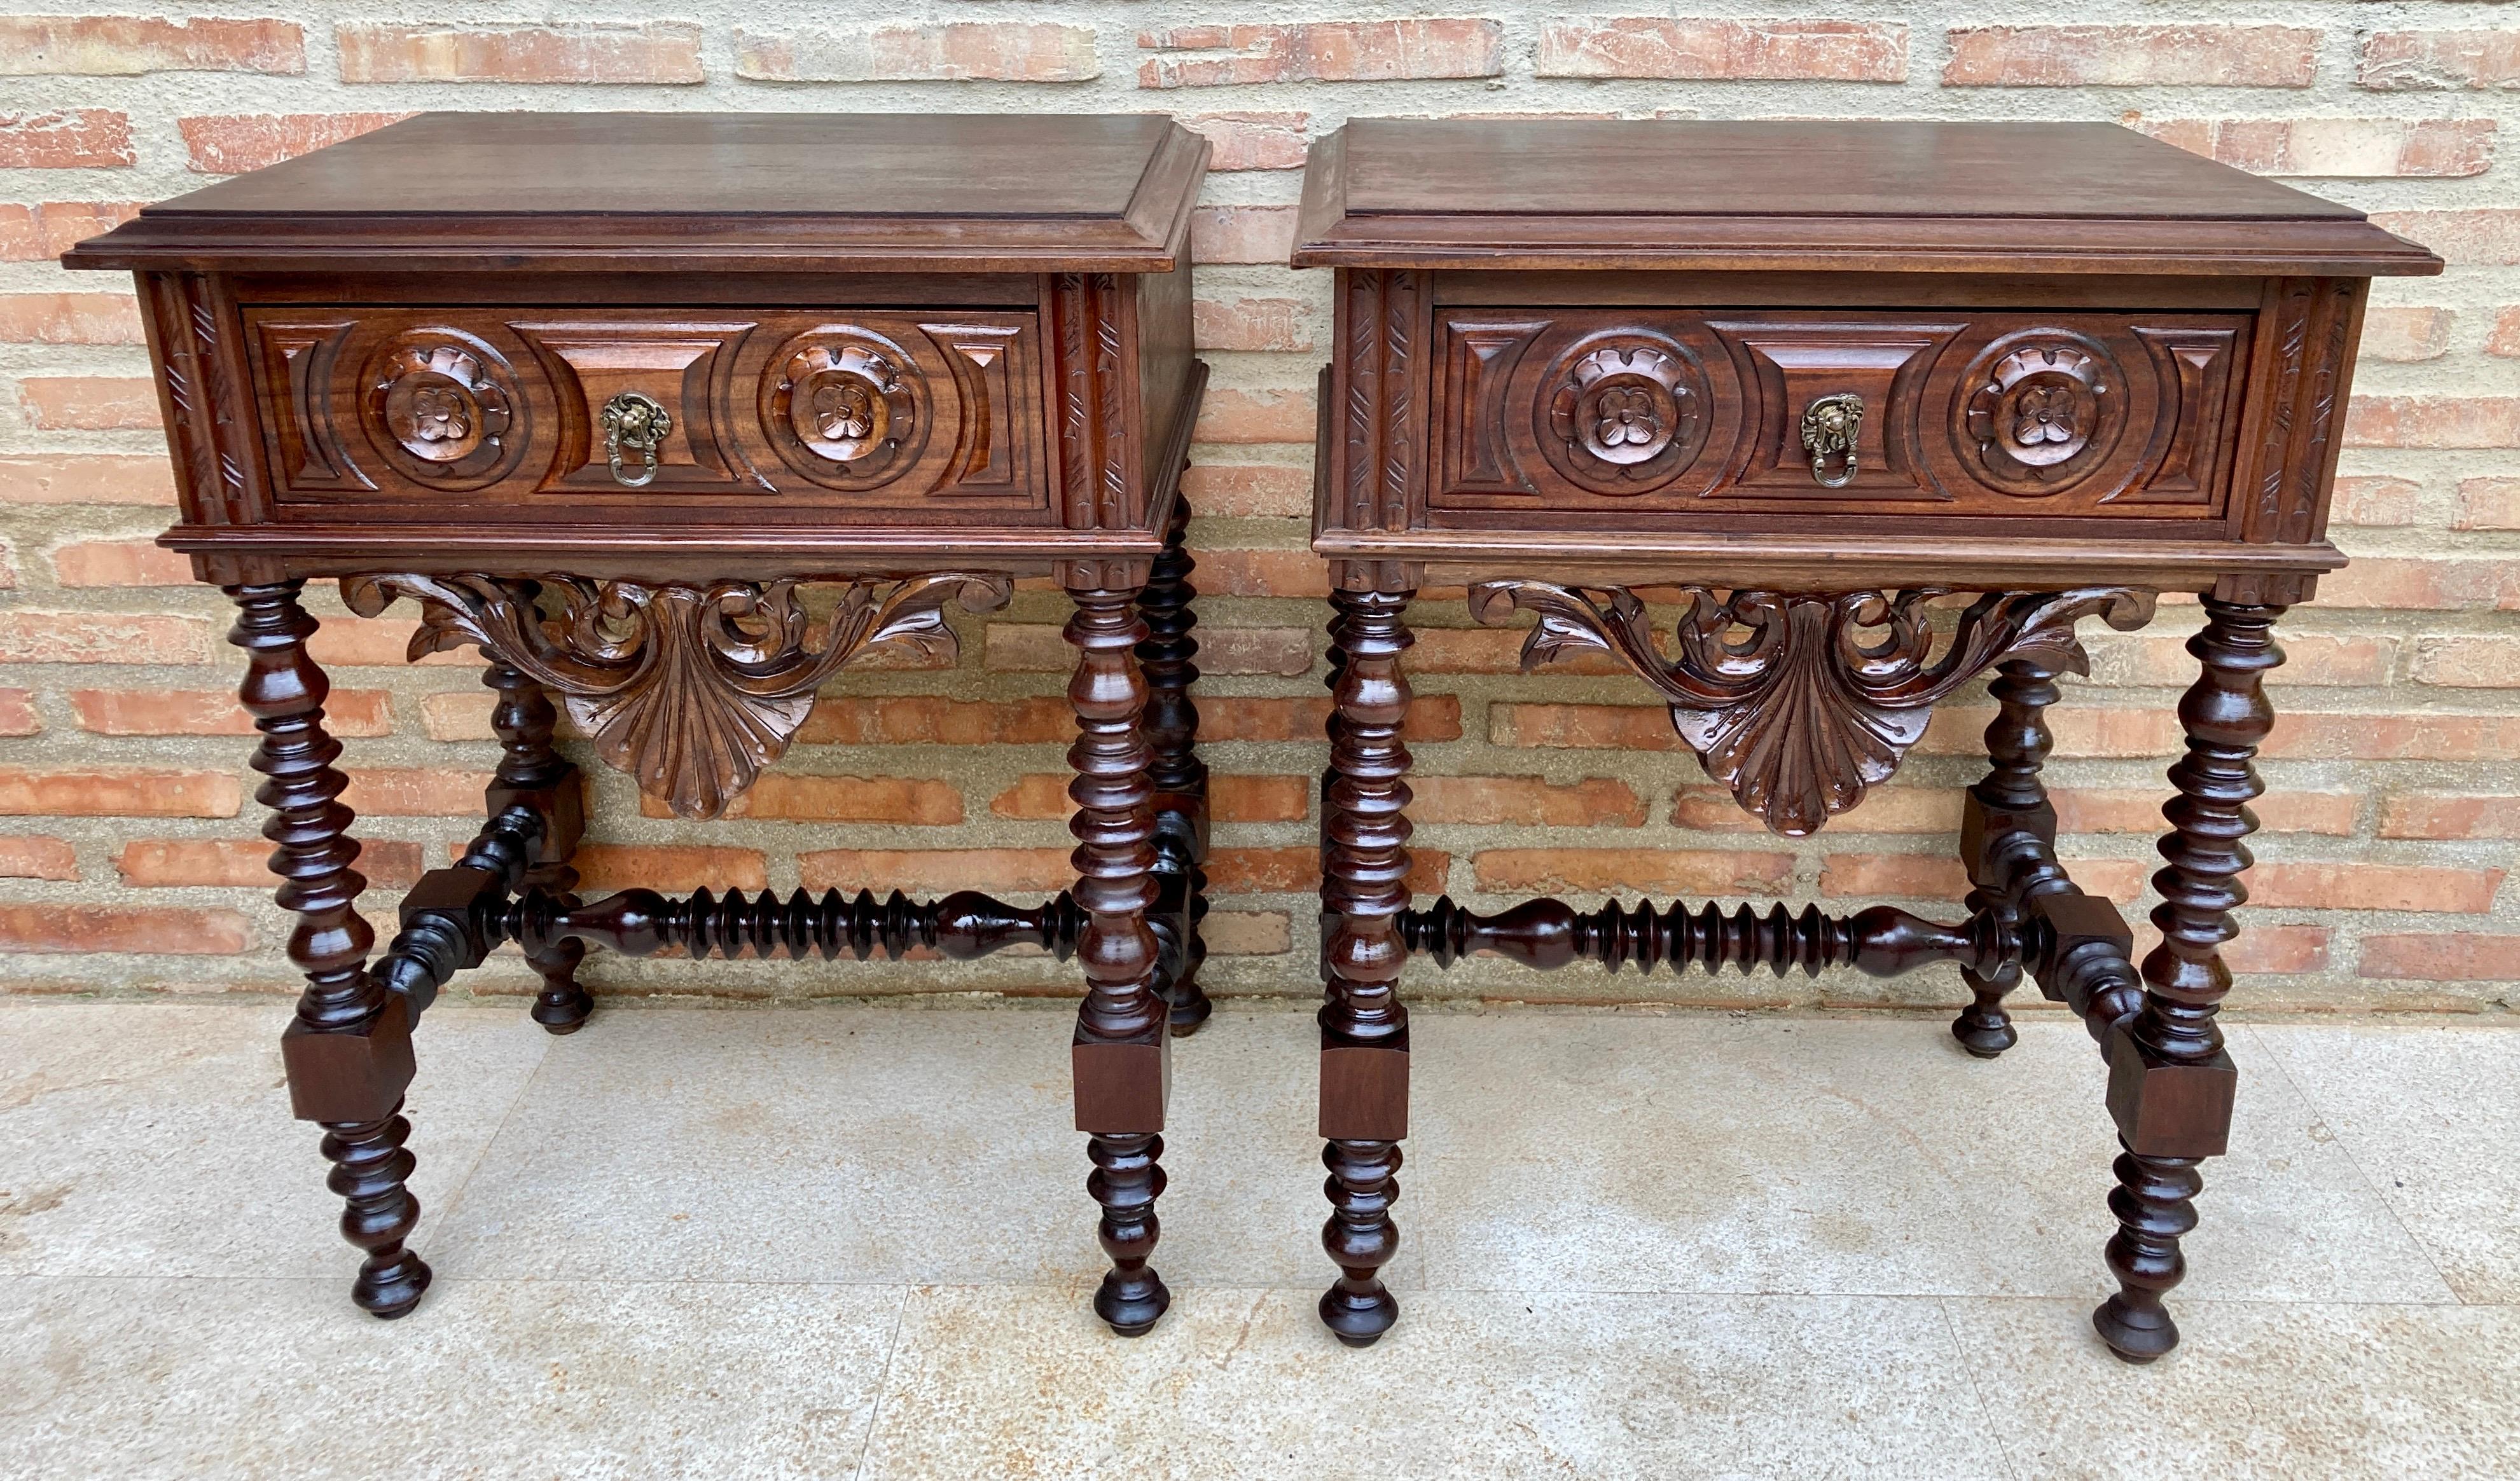 20th century pair of solid carved French nightstands with turned columns and stretcher. 
It has one carved drawer with foliate reliefs and original hardware. 
French Provincial 
Light wear consistent with age and use, Completely restored.